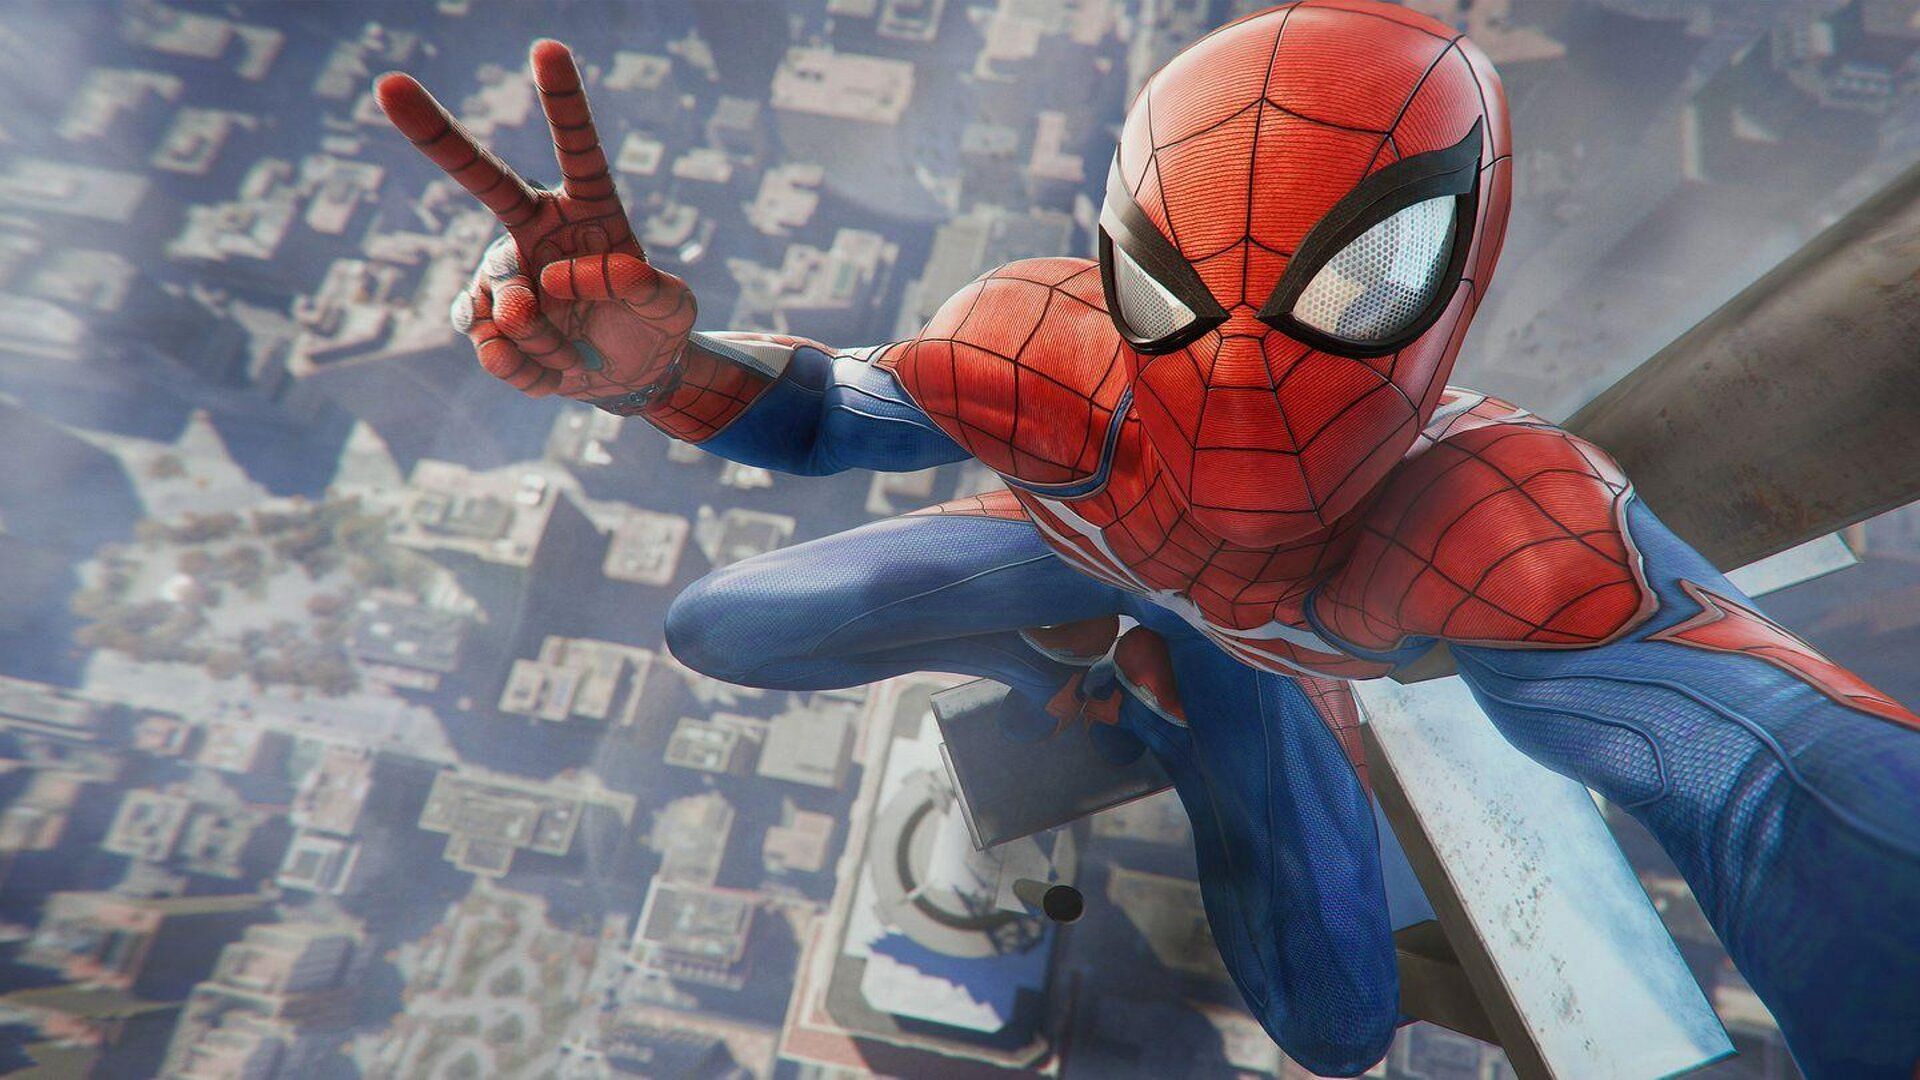 Want to take a Selfie in the sky while slinging across New York? Yes, you can do that (Image via Insomniac games)